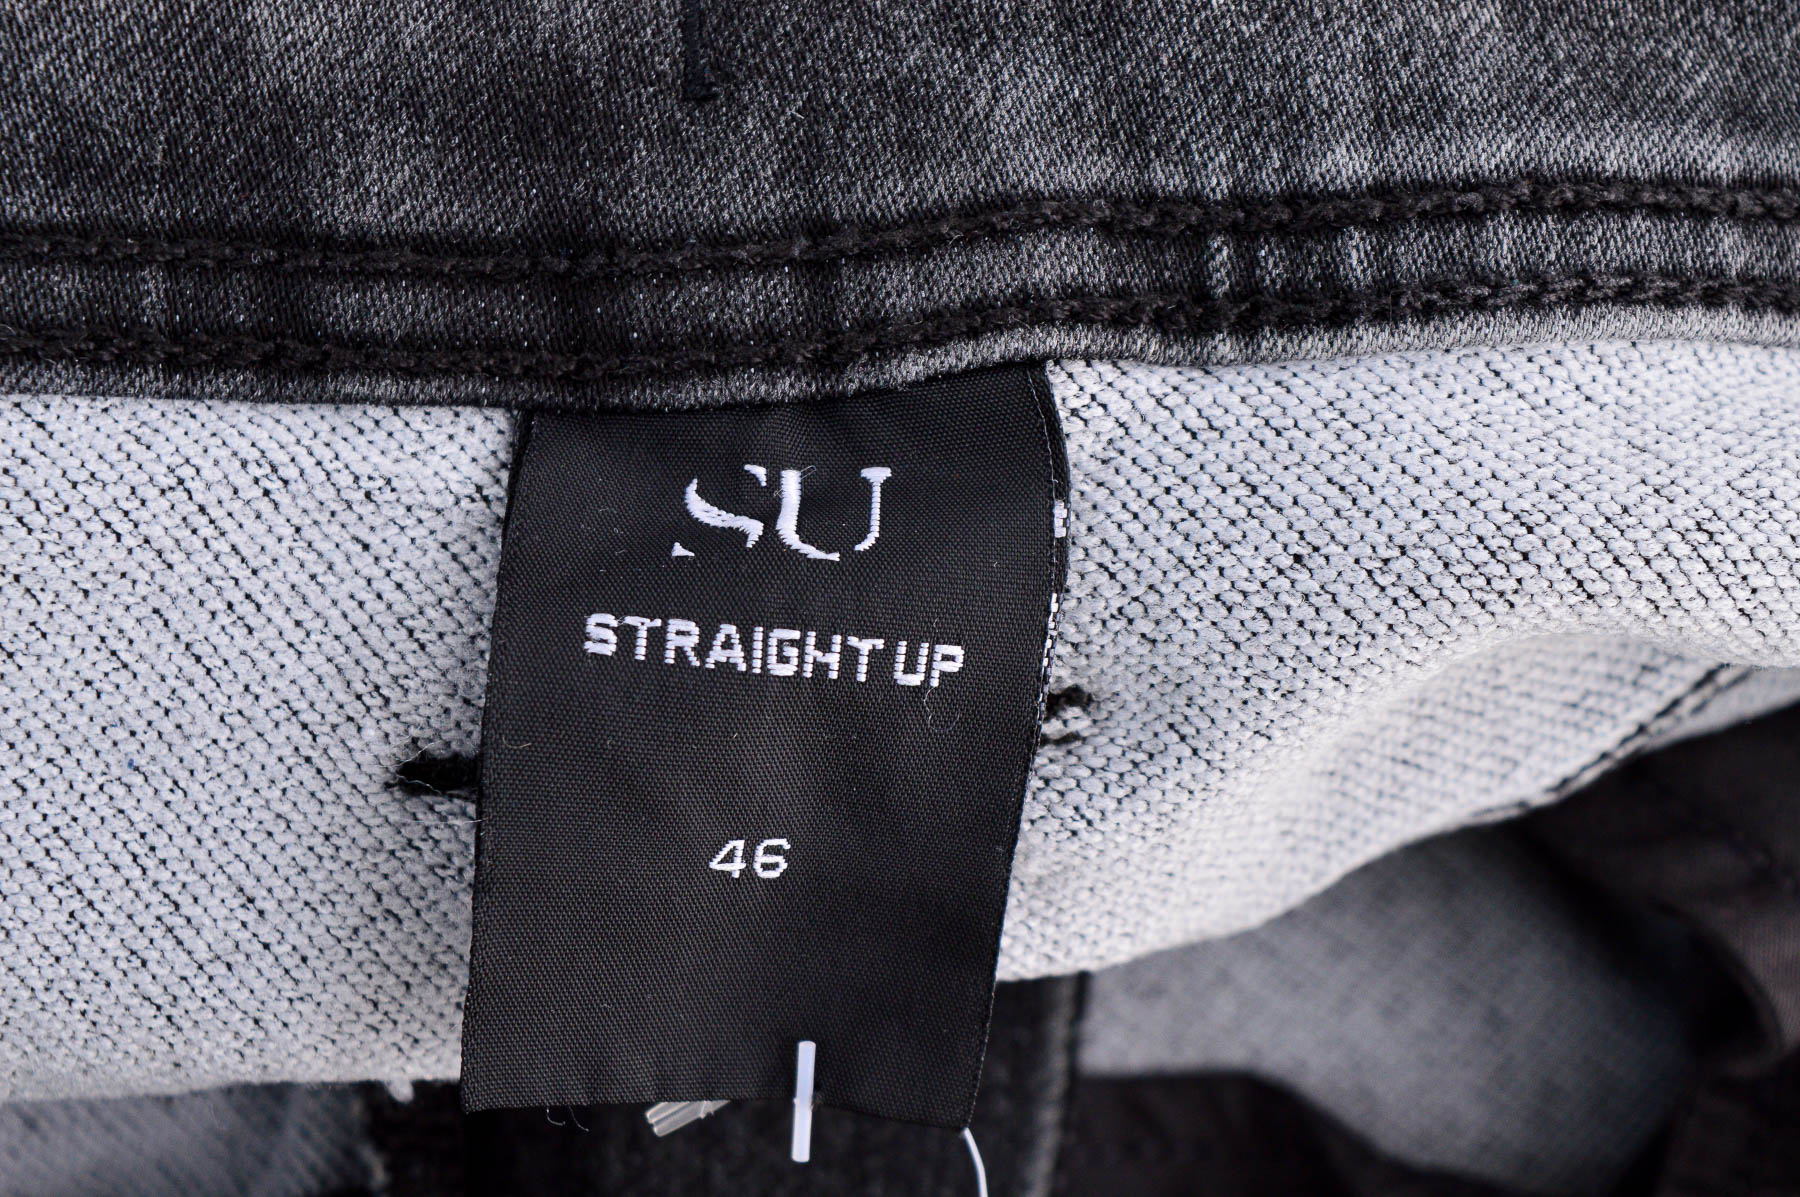 Men's jeans - Straight Up - 2